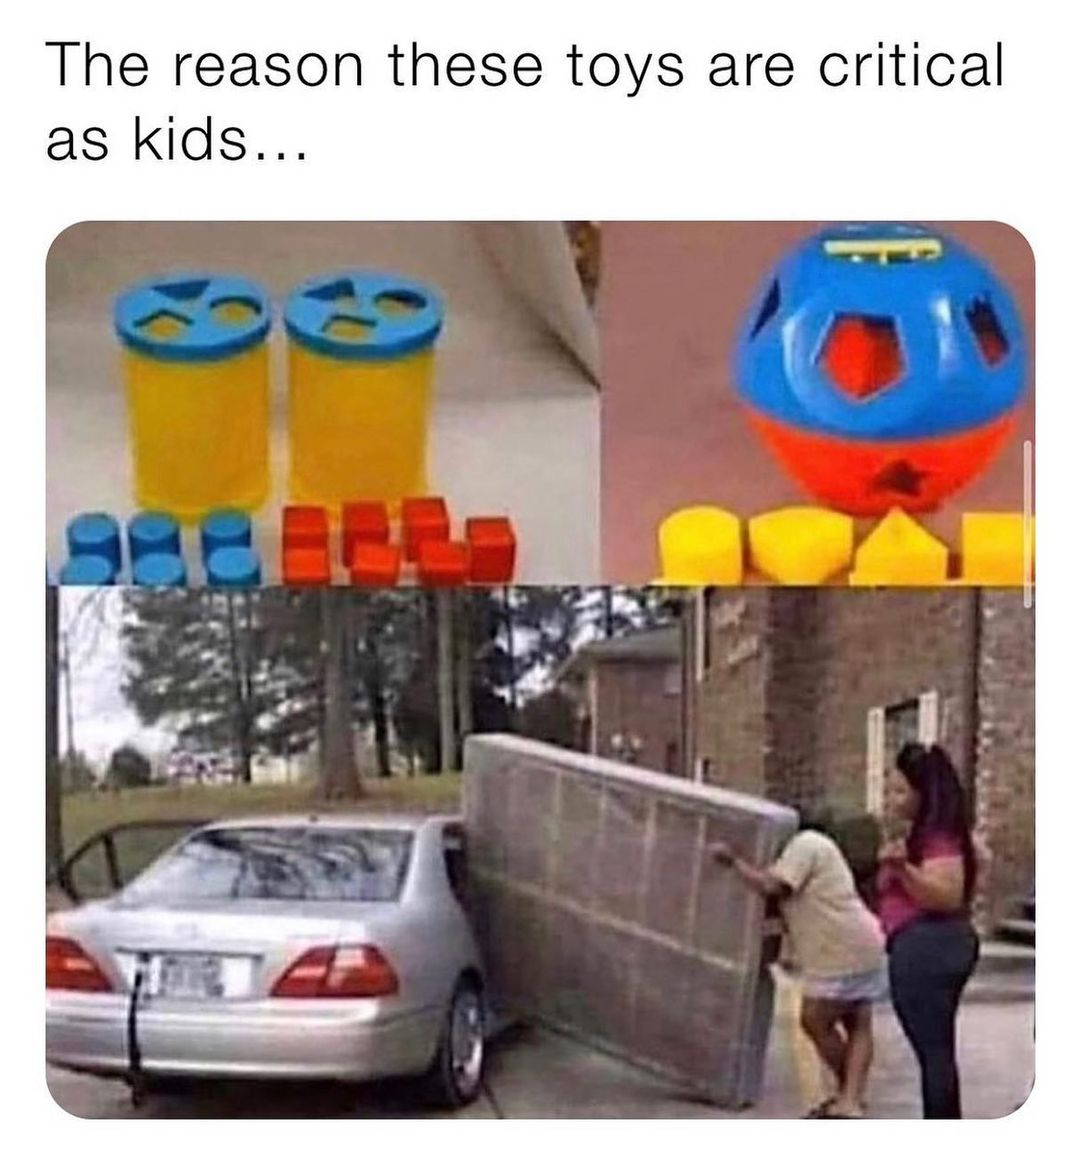 The reason these toys are critical as kids...